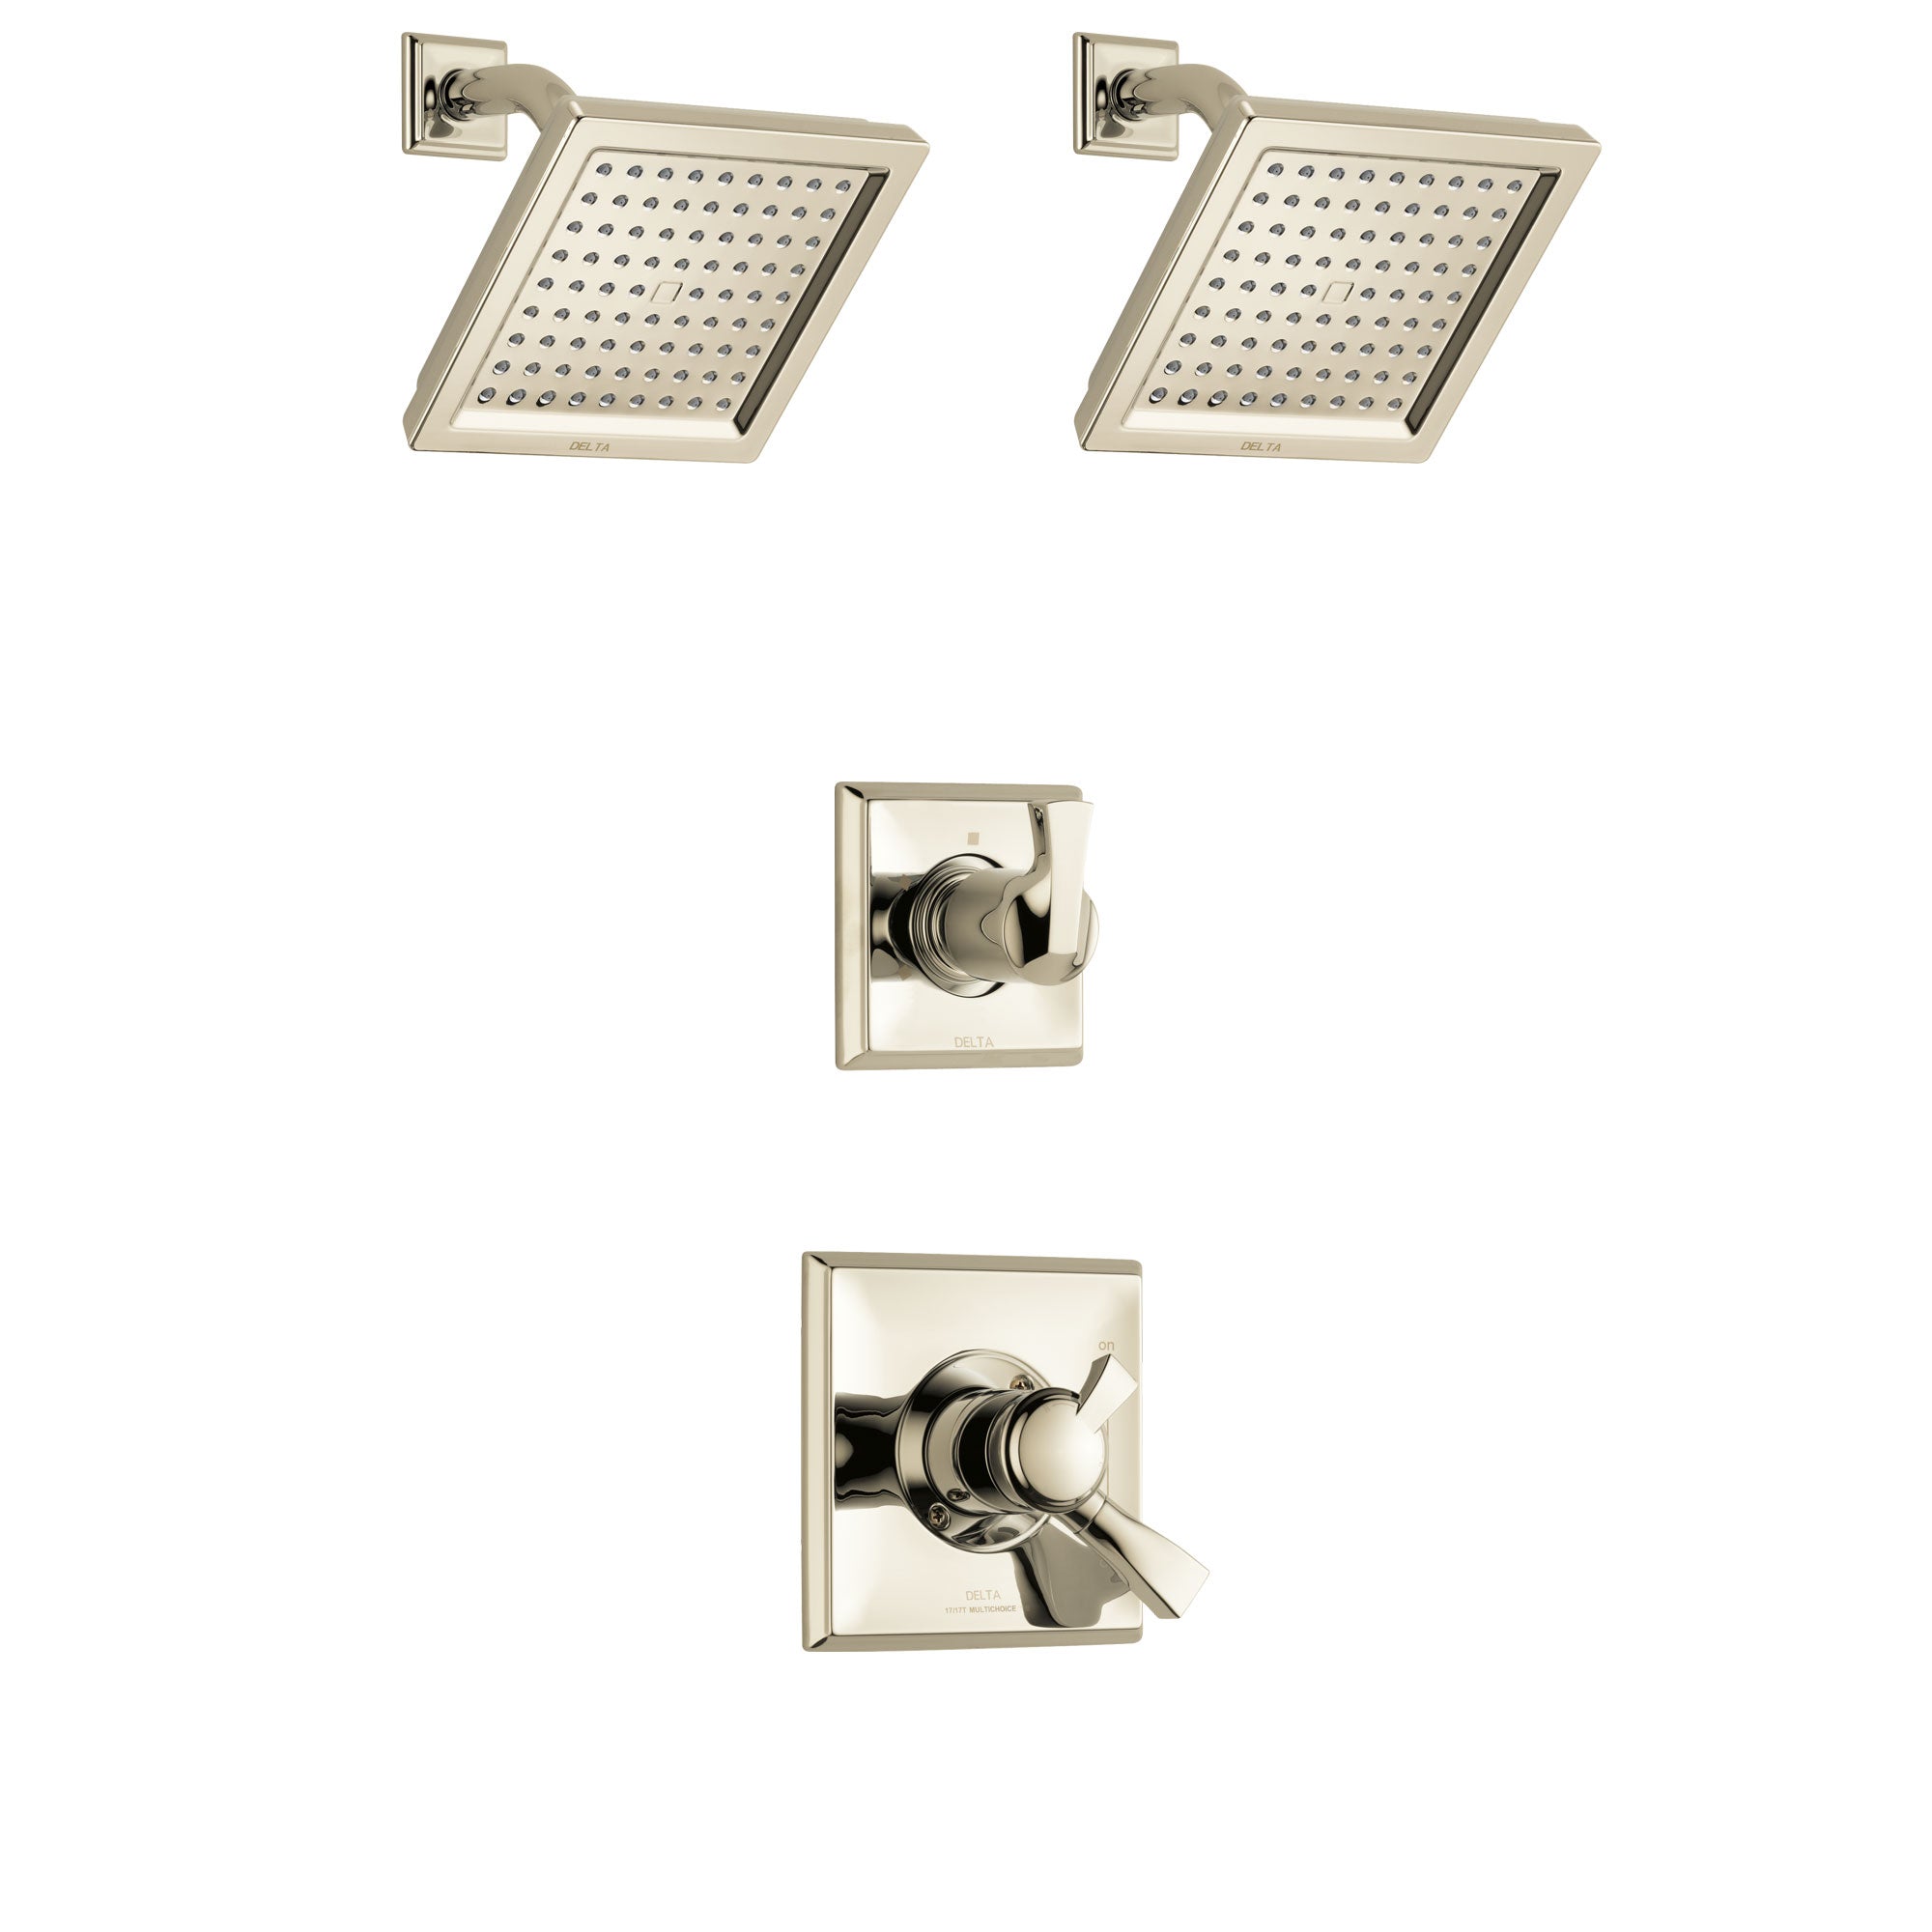 Delta Dryden Polished Nickel Finish Shower System with Dual Control Handle, 3-Setting Diverter, 2 Showerheads SS172511PN4